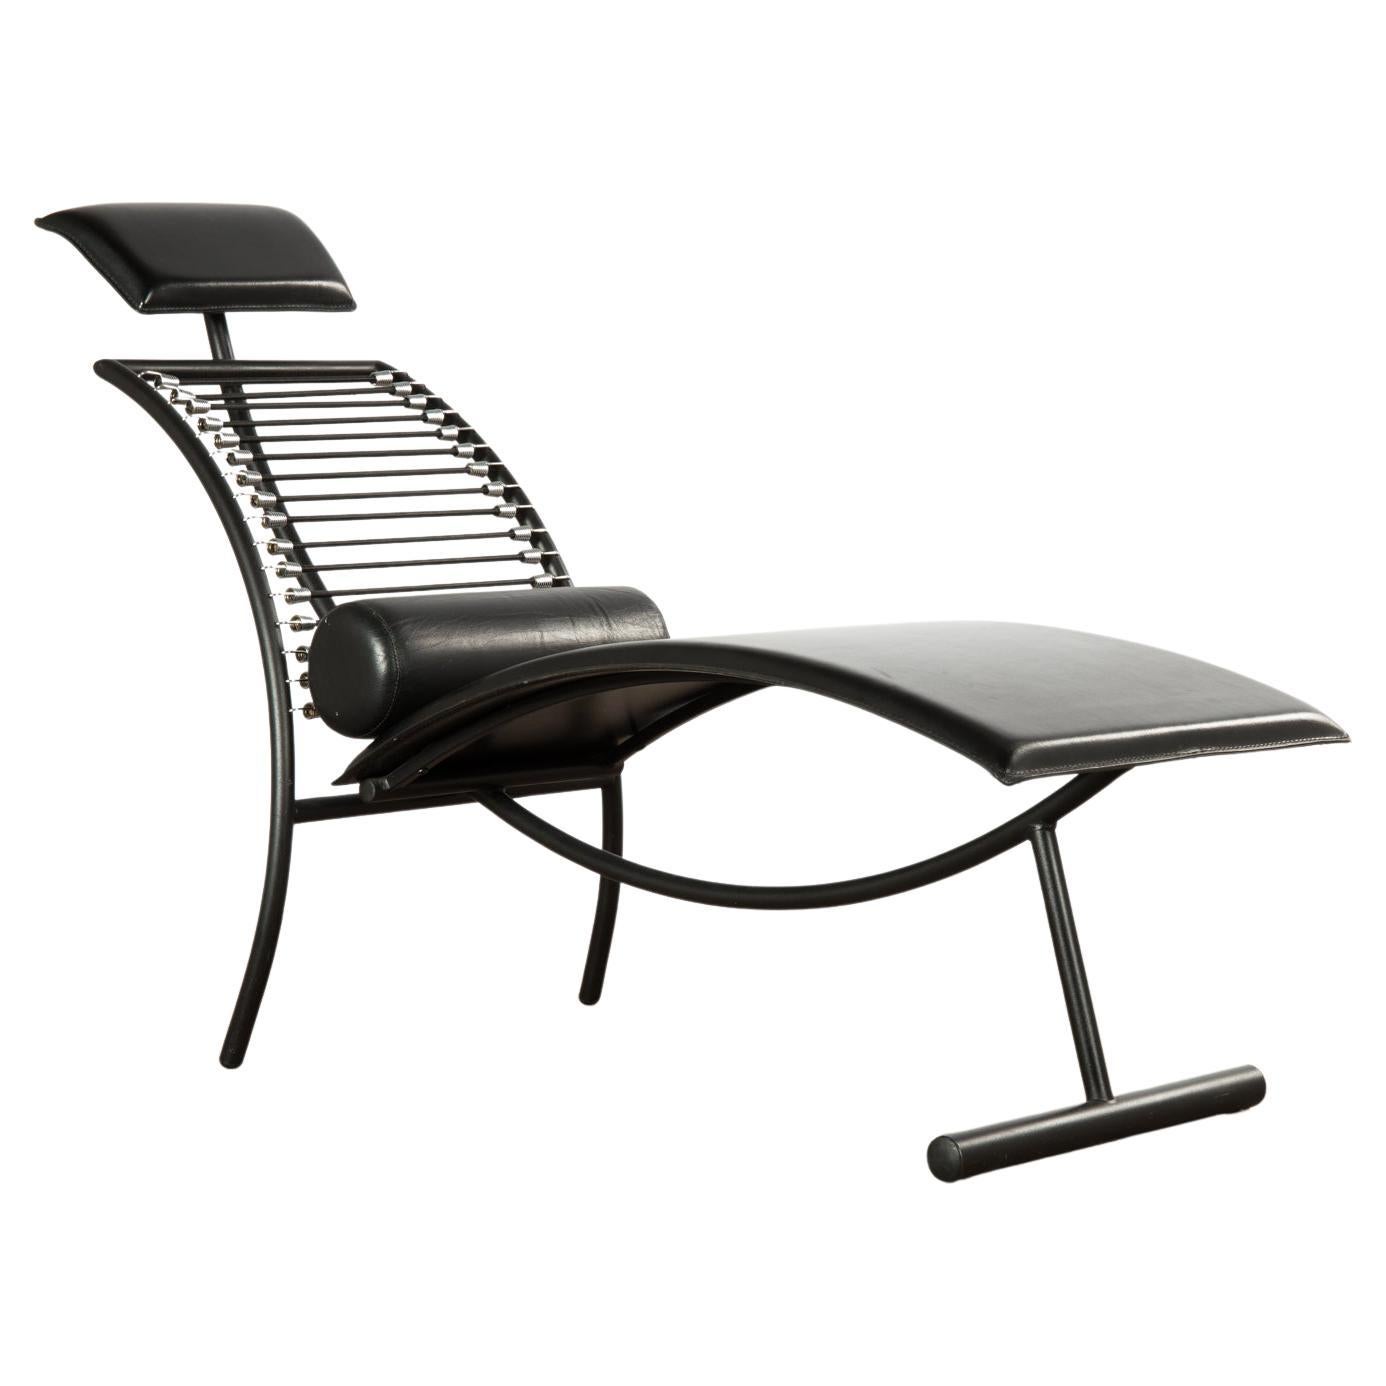 Post-Modern Italian Chaise Lounge Chair in Faux Black Leather, 1980s